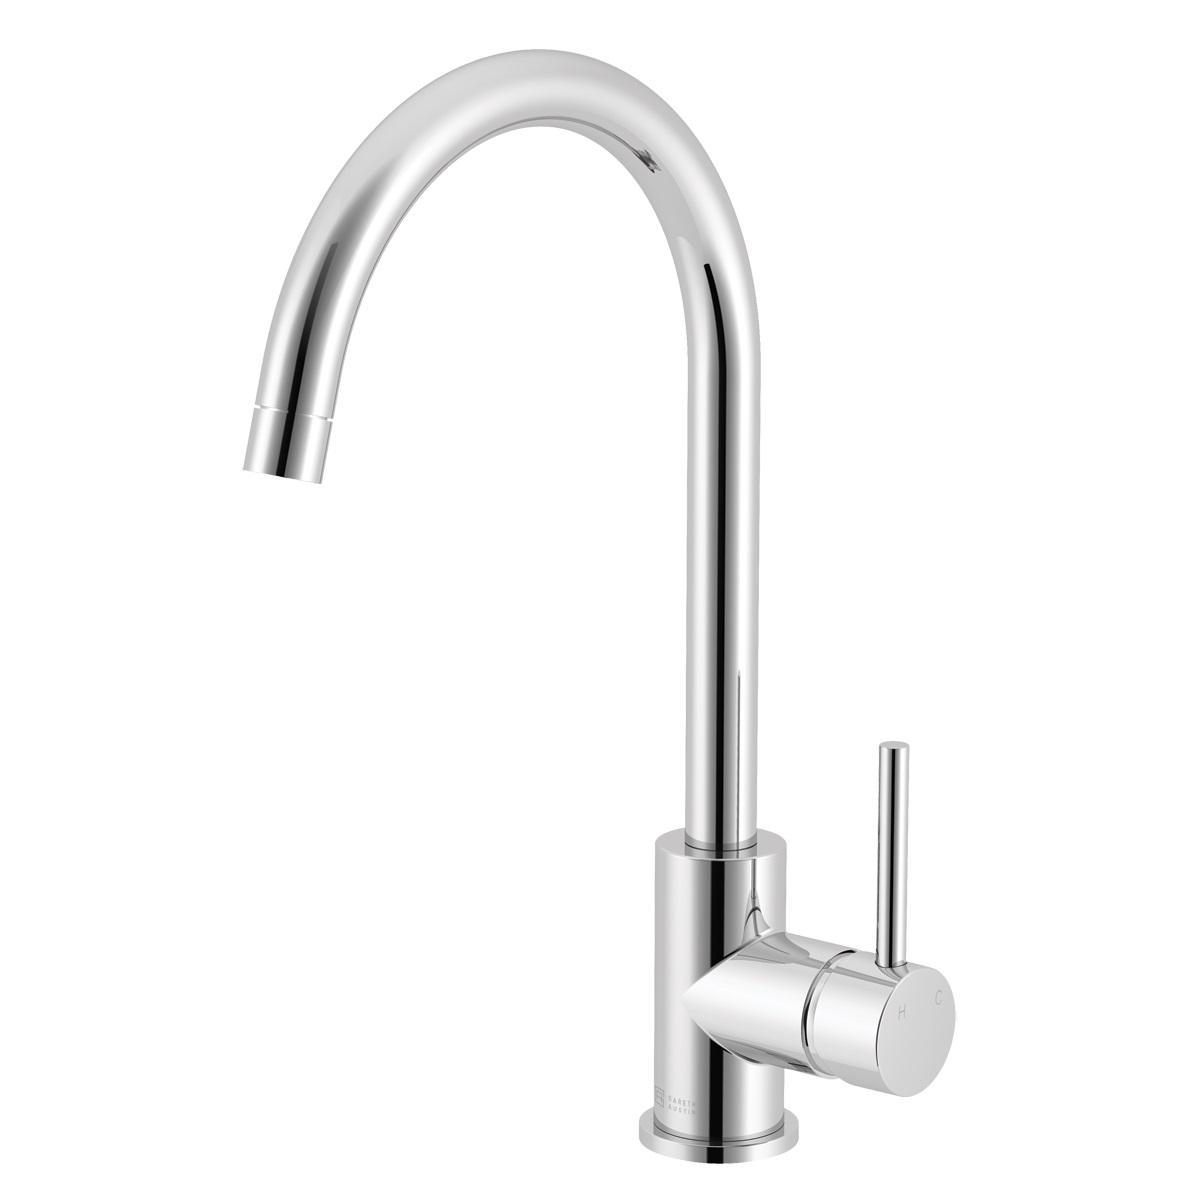 LUCIA G/NECK SIDE LEVER MIXER